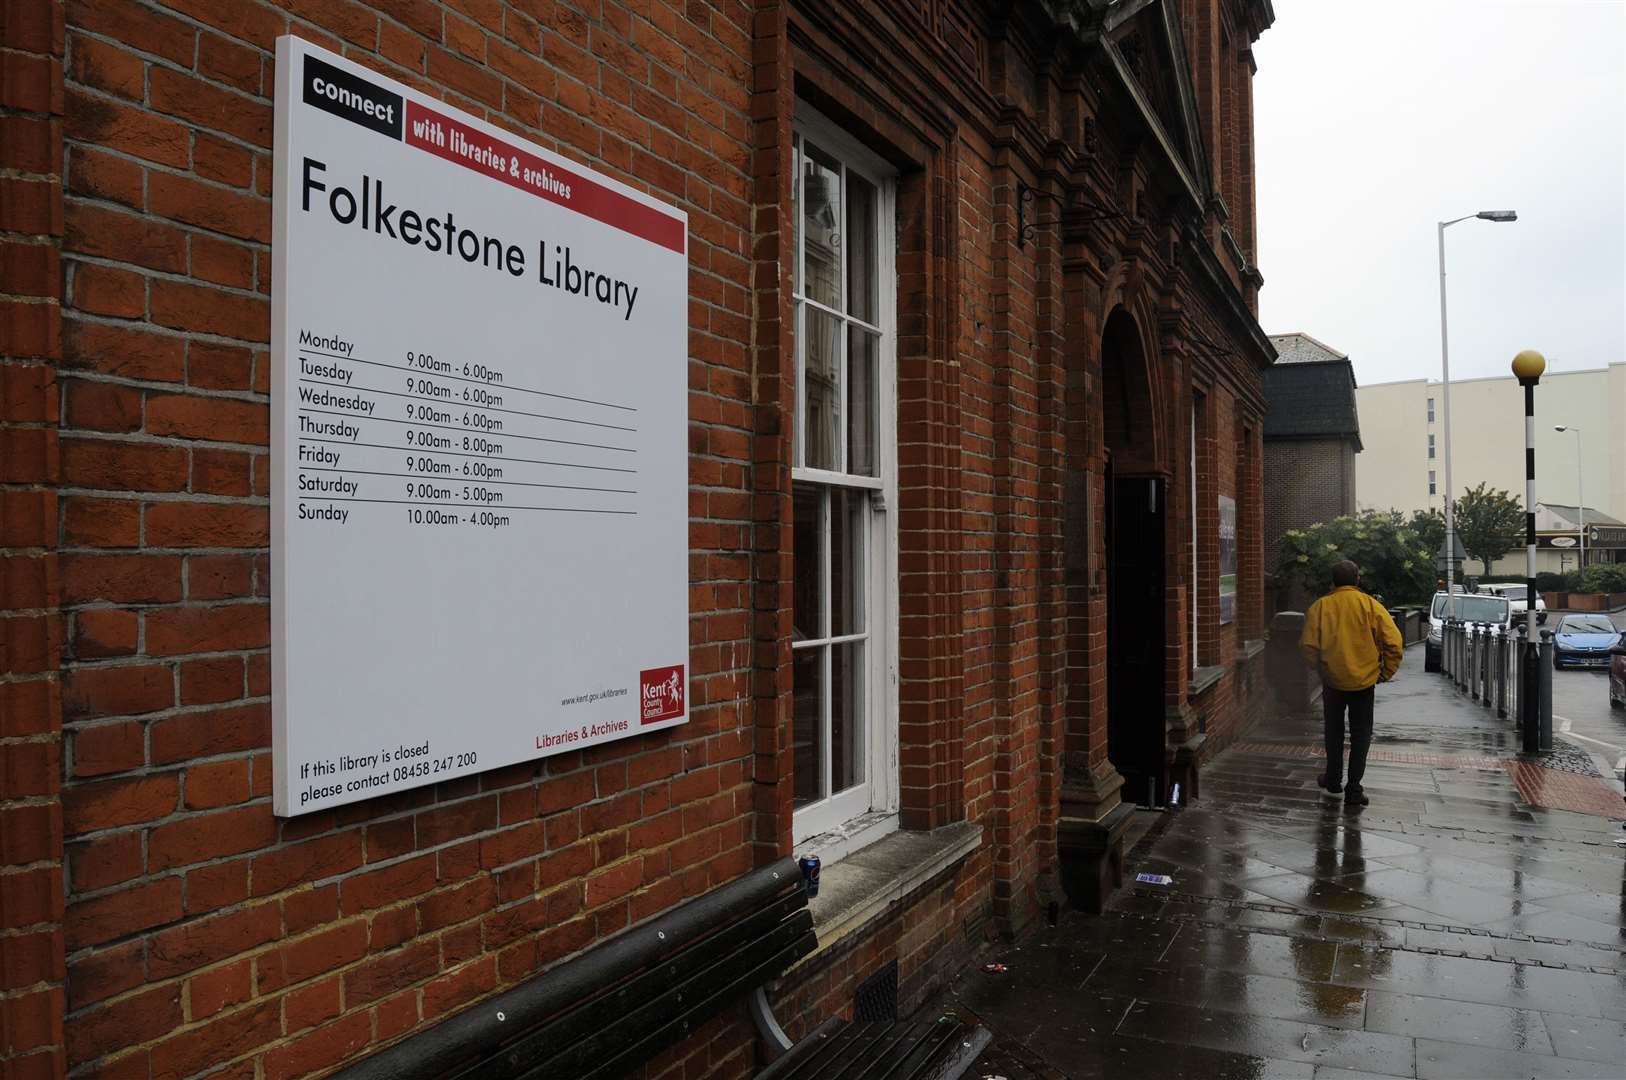 Visitors are advised to use other libraries during the closure